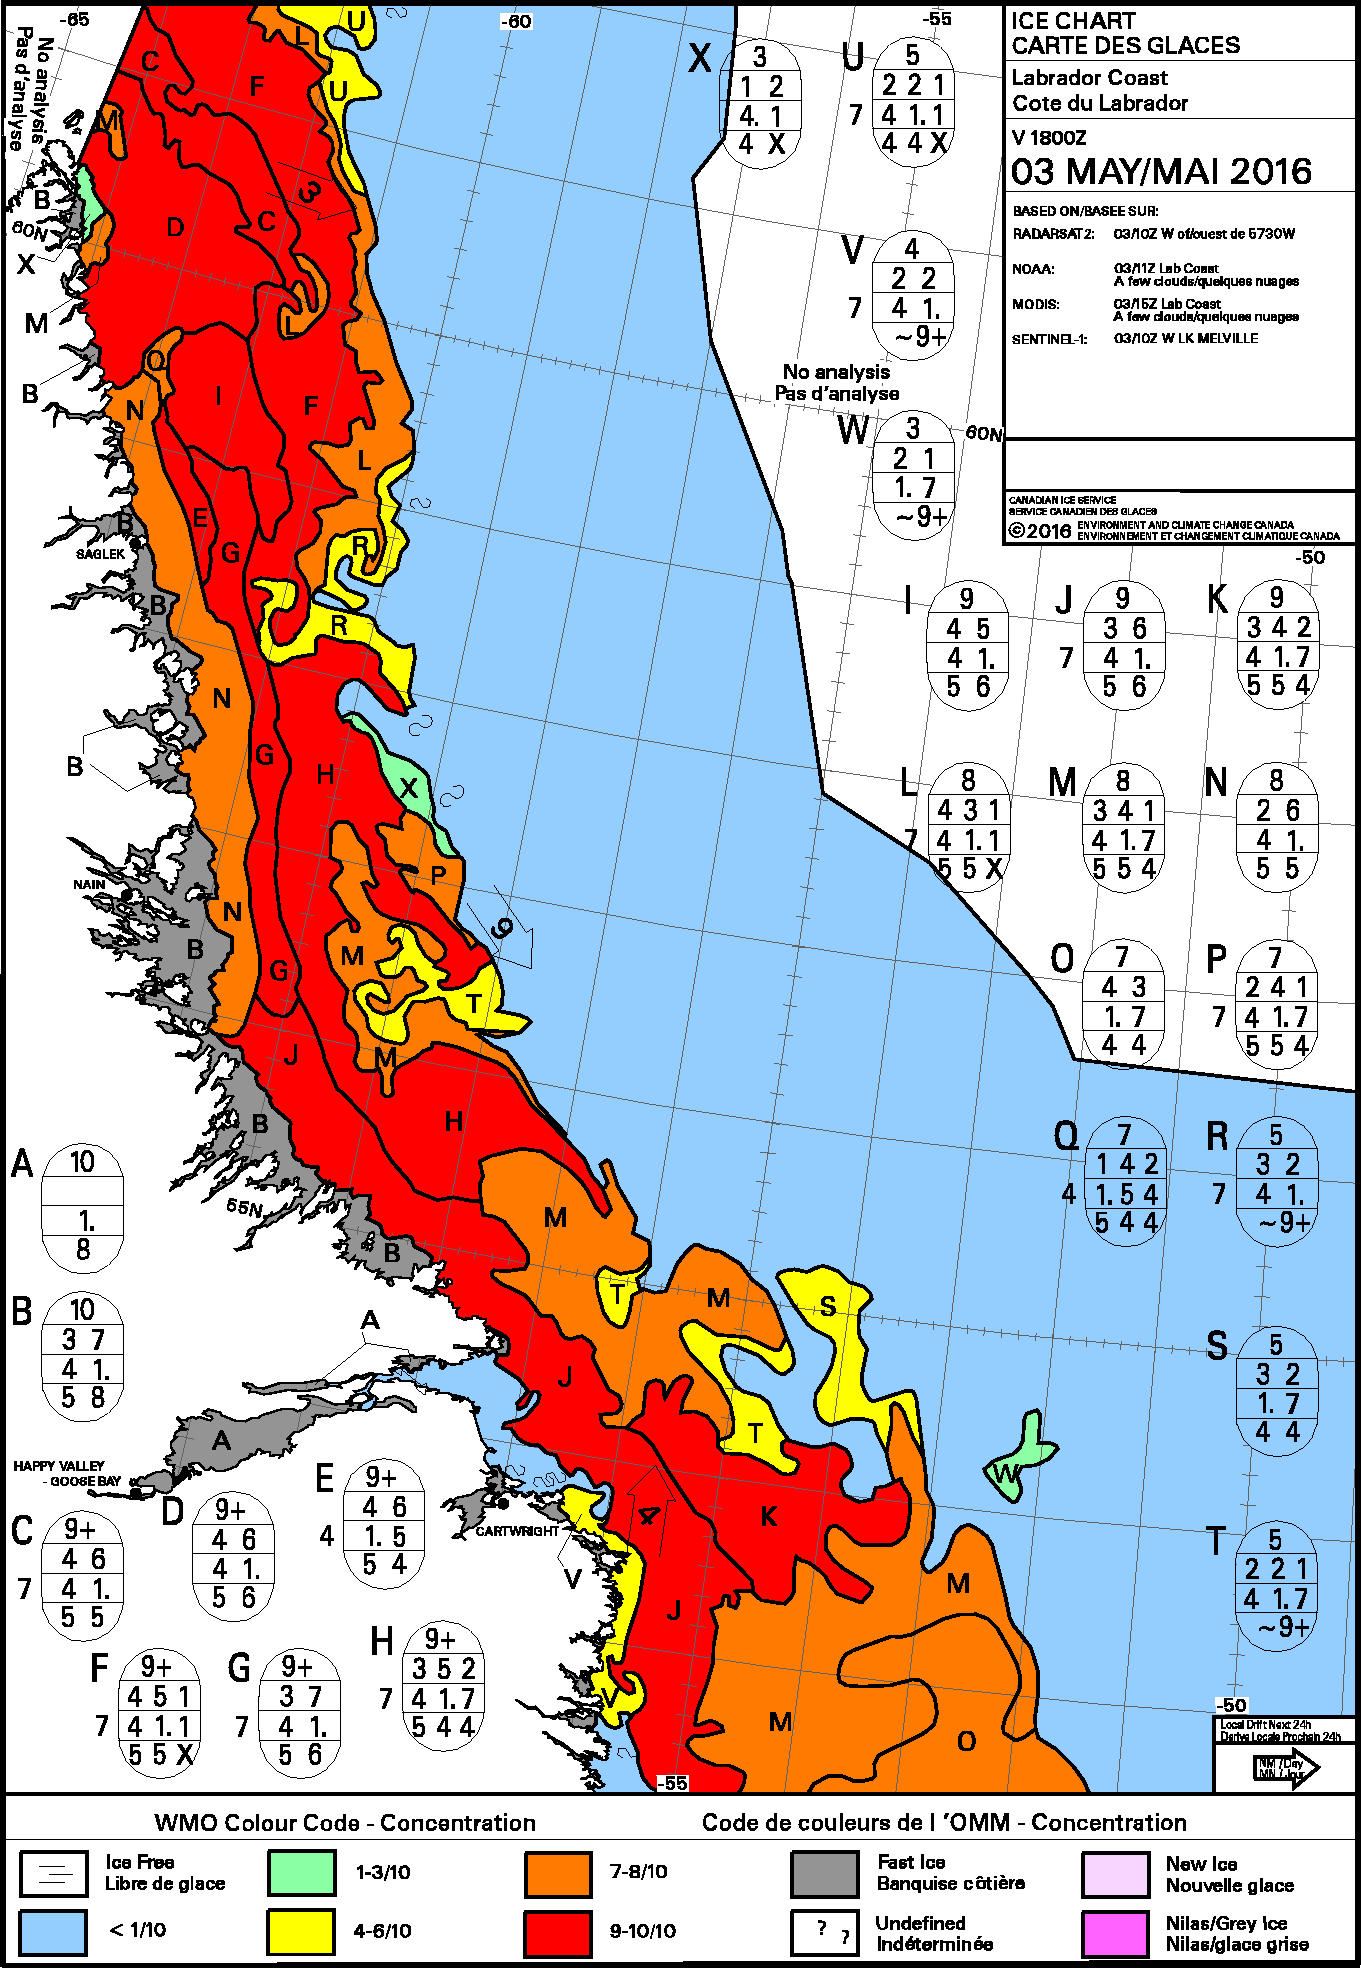 Ice concentration off the Labrador coast [click to enlarge]